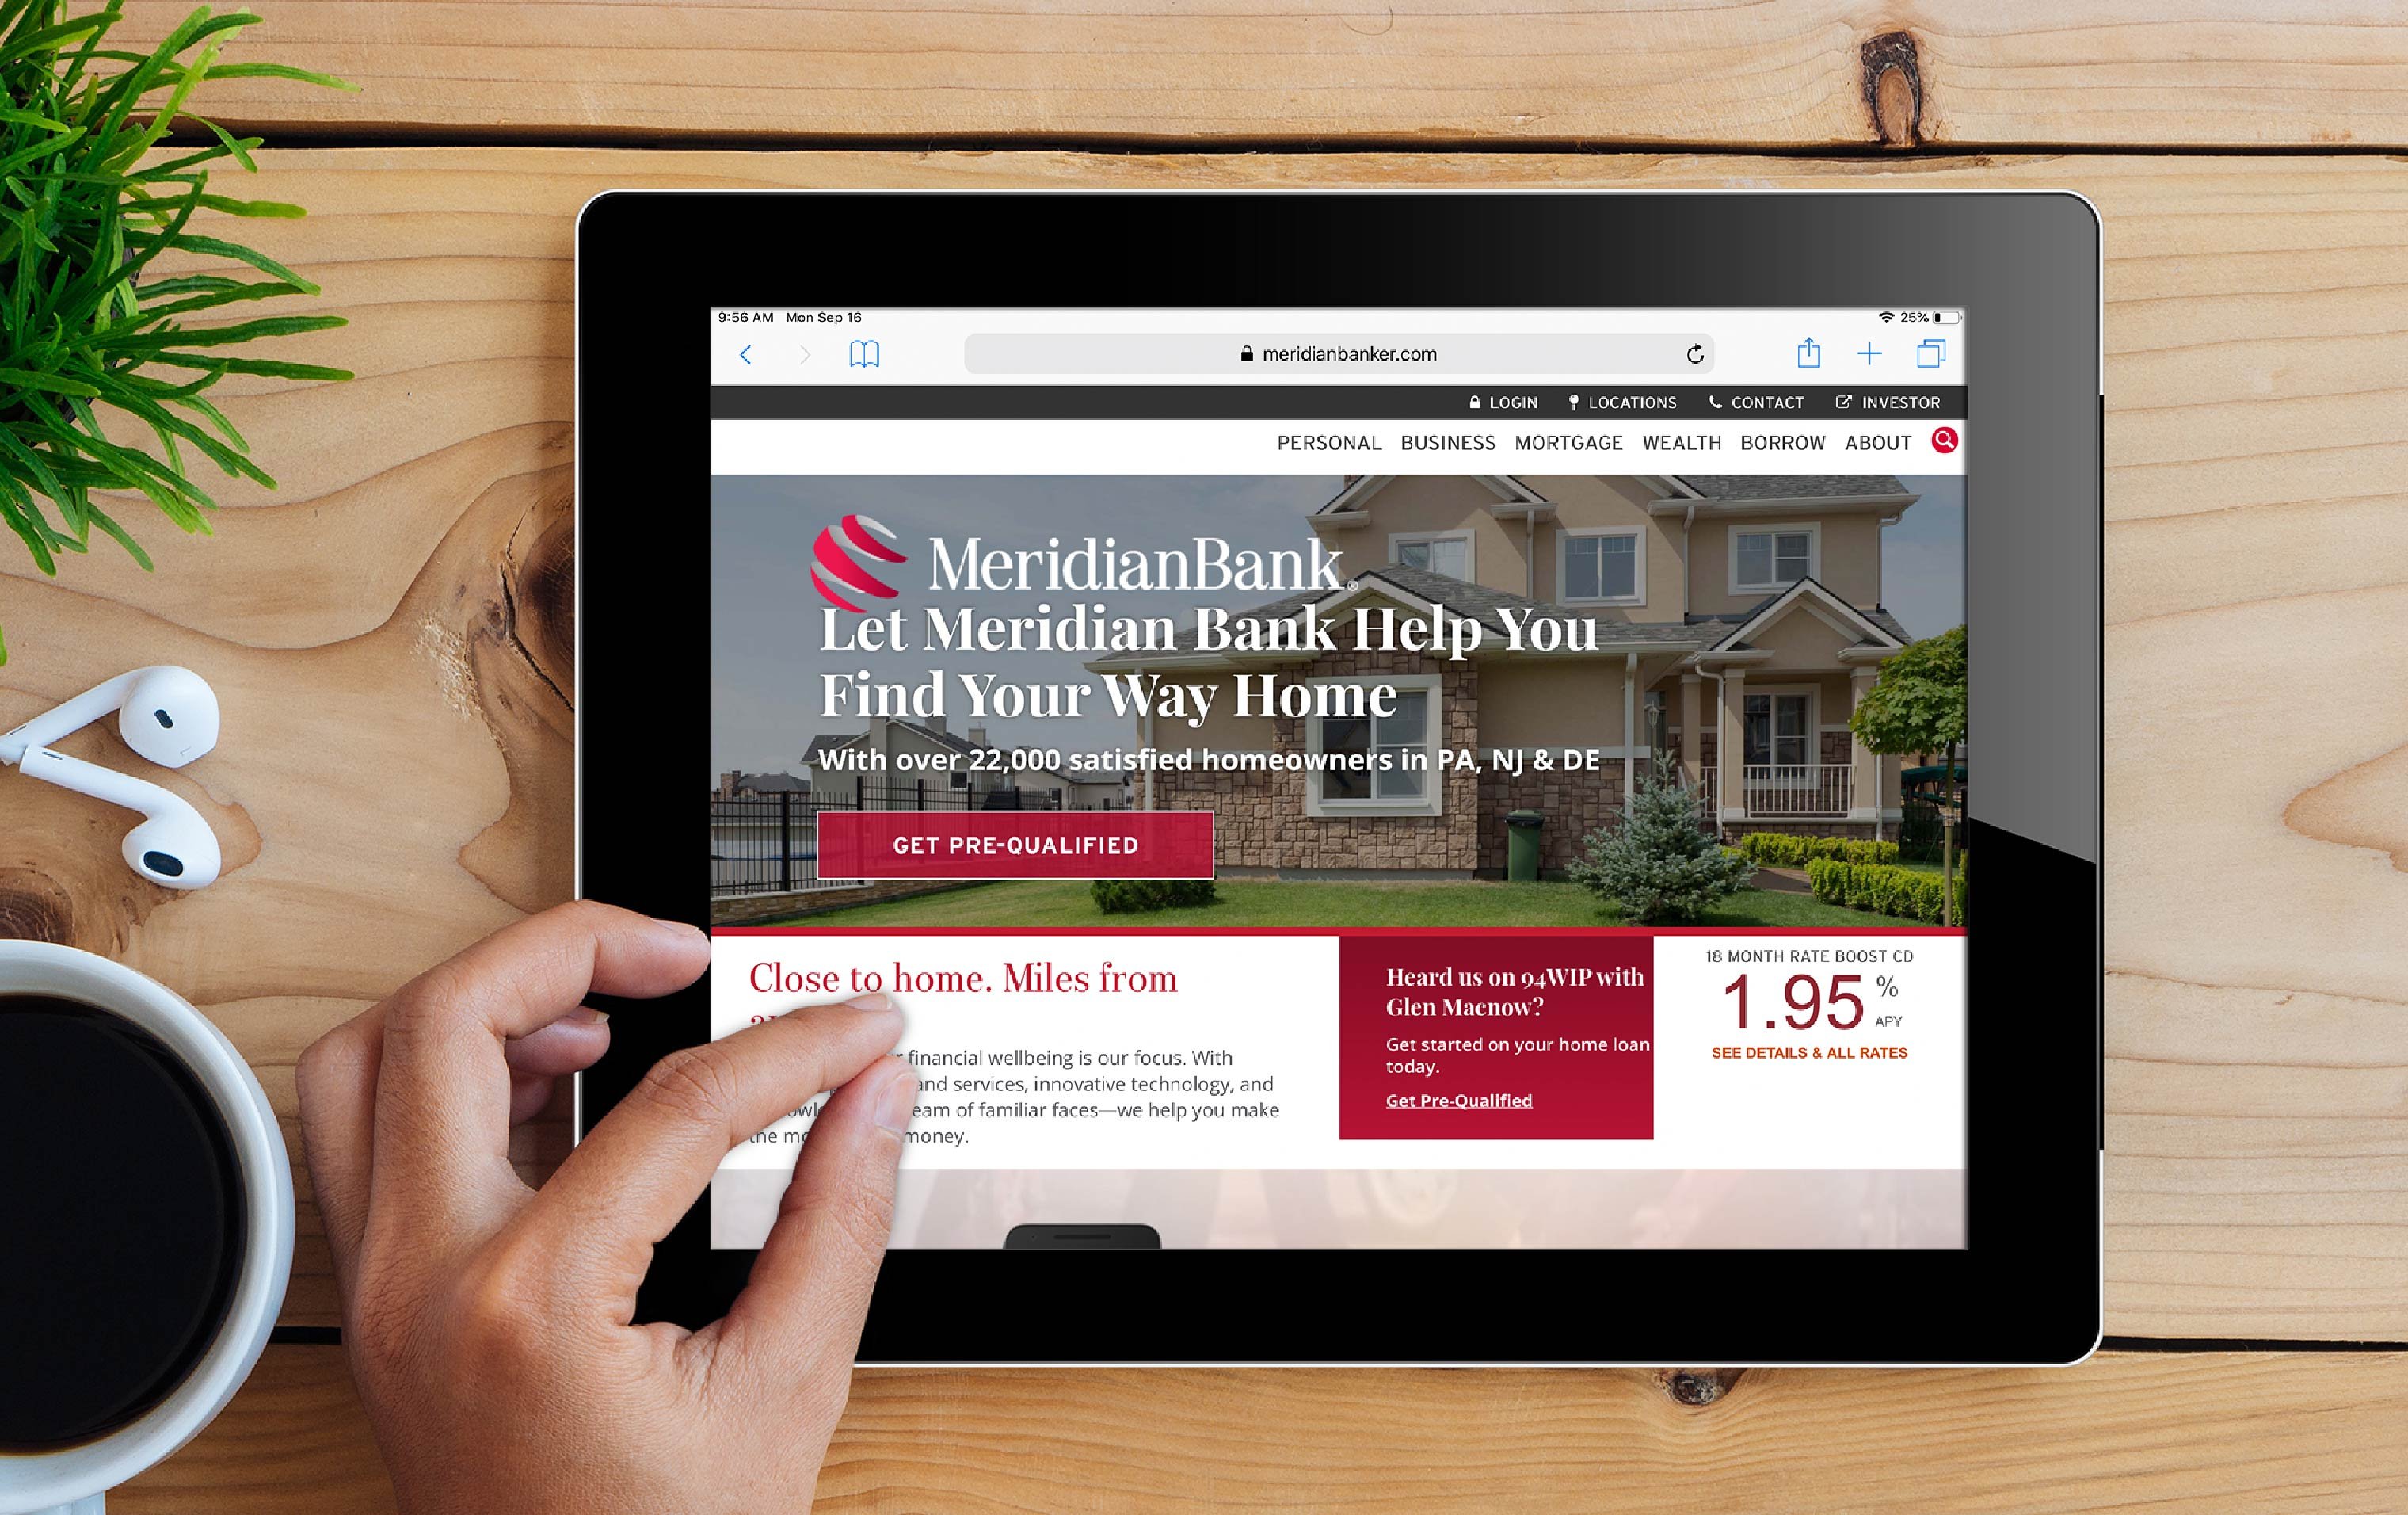 The redesigned Meridian Bank website as seen on a tablet